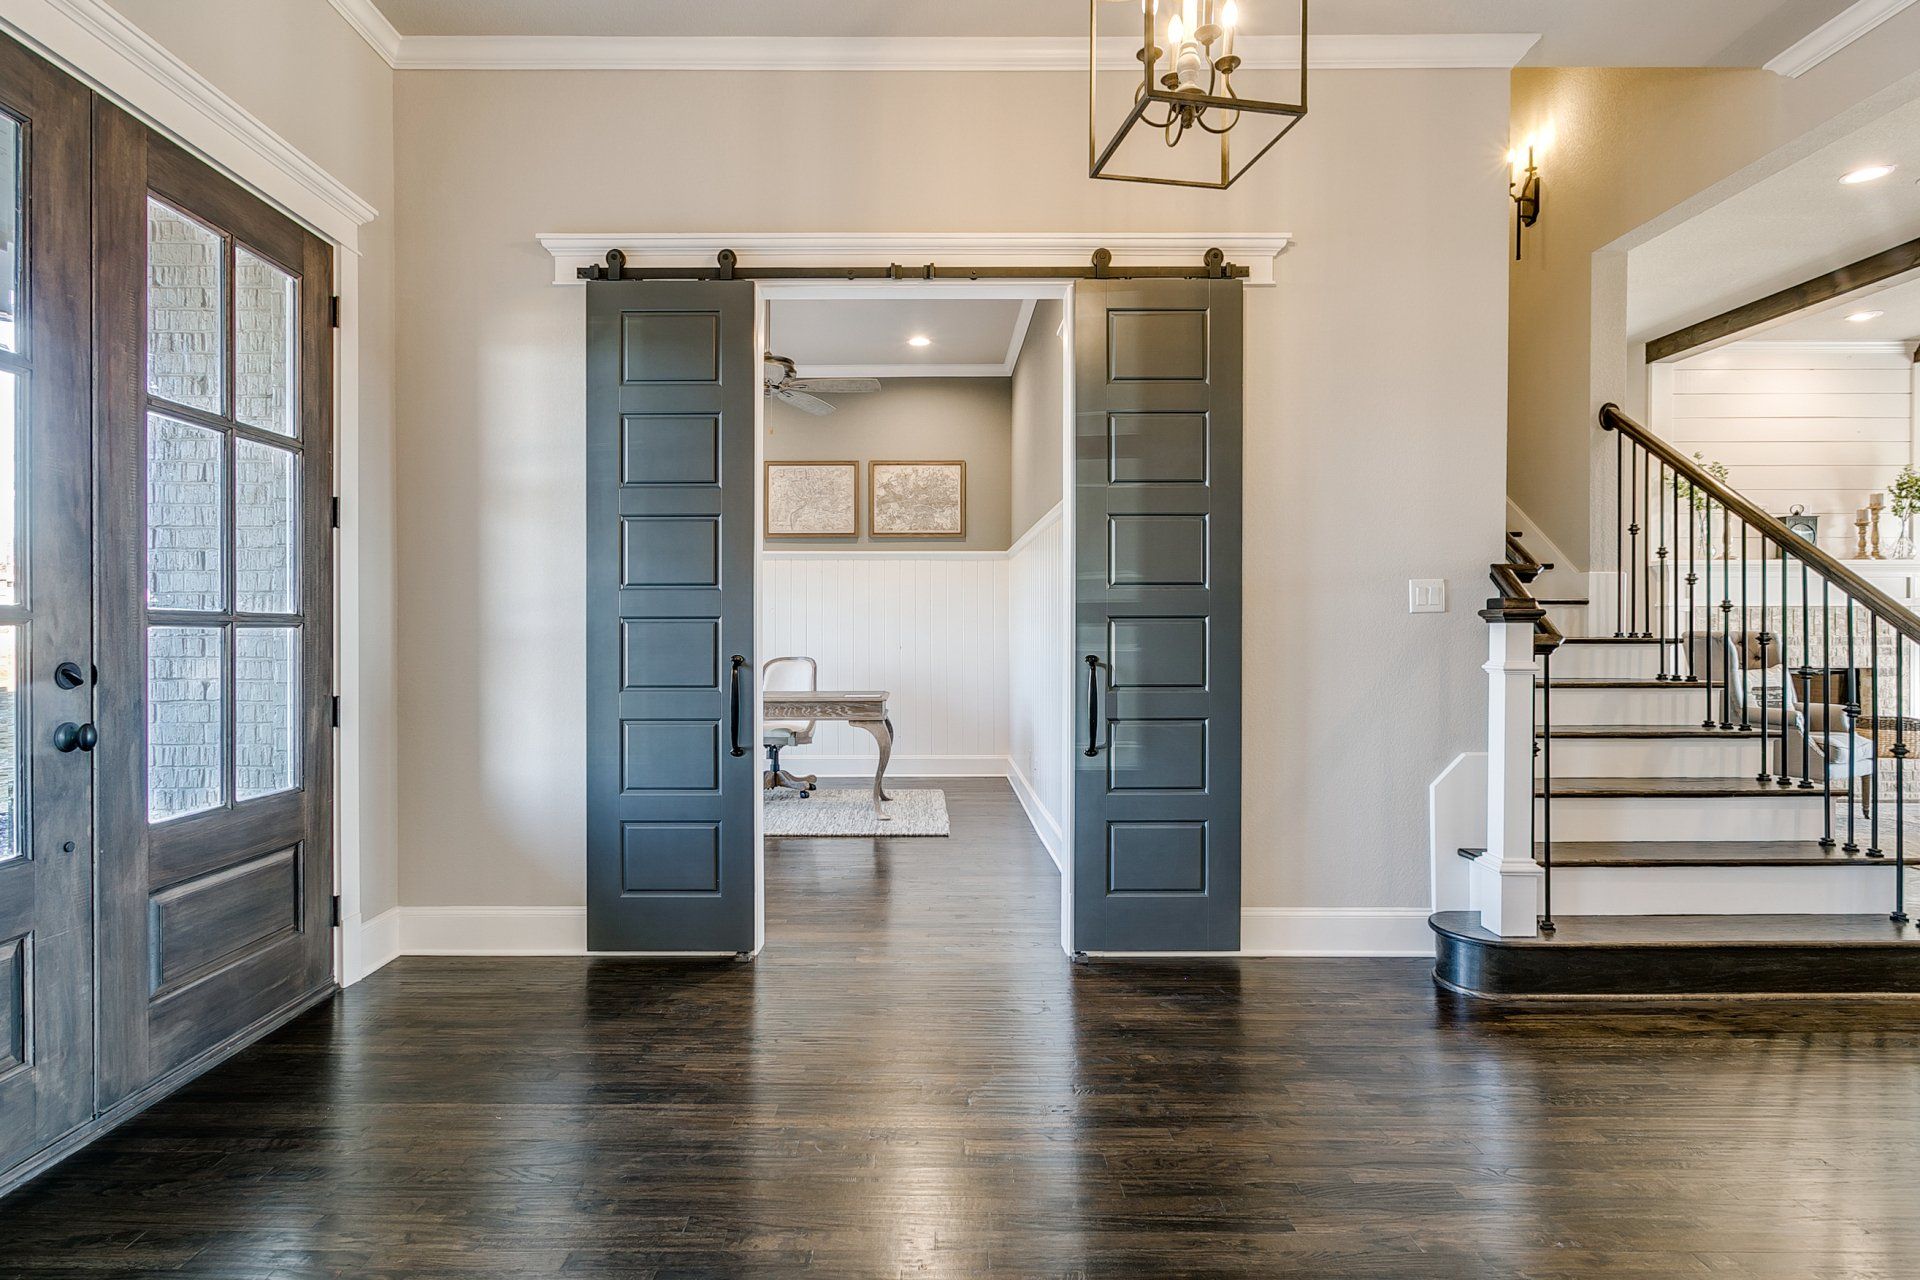 Elegant home hallway | 3D Floor Plan Tour | Our Gallery | John Houston Homes | New Homes for Sale in Dallas-Fort Worth, Waco and surrounding areas.